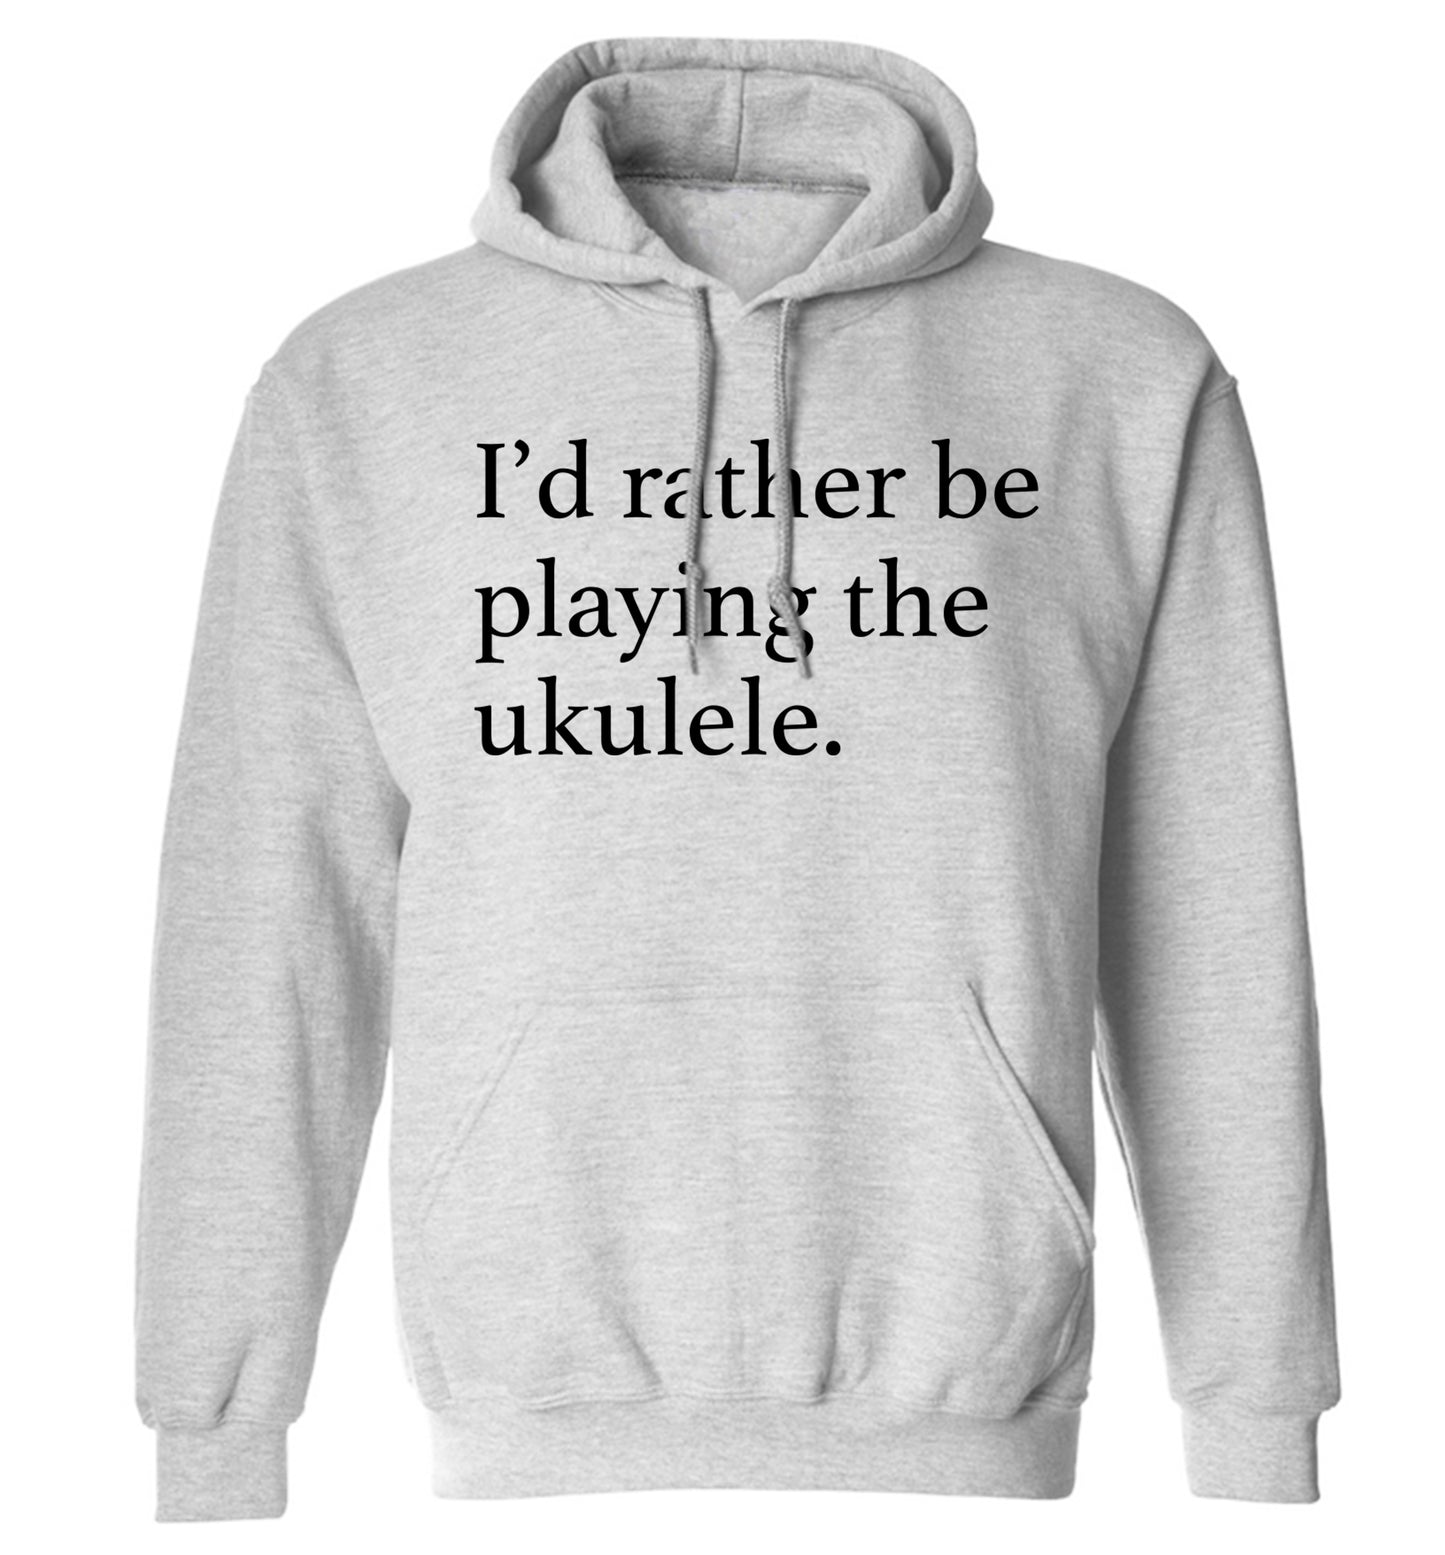 I'd rather by playing the ukulele adults unisex grey hoodie 2XL